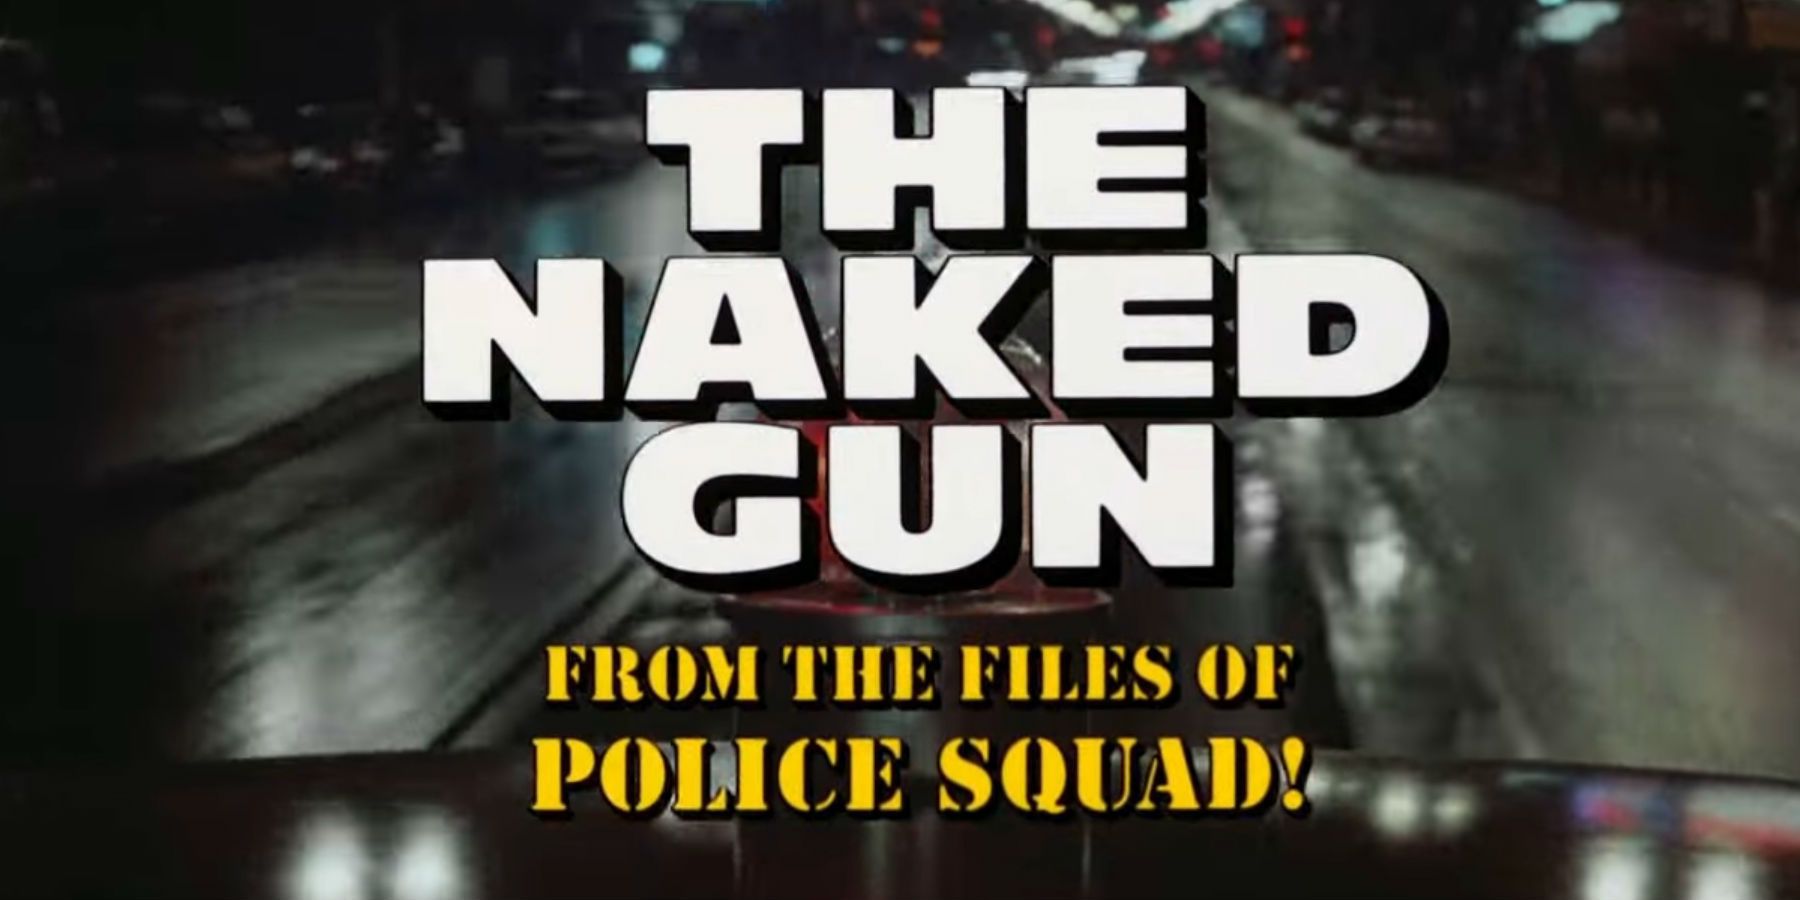 The police car drives through the streets in The Naked Gun opening credits